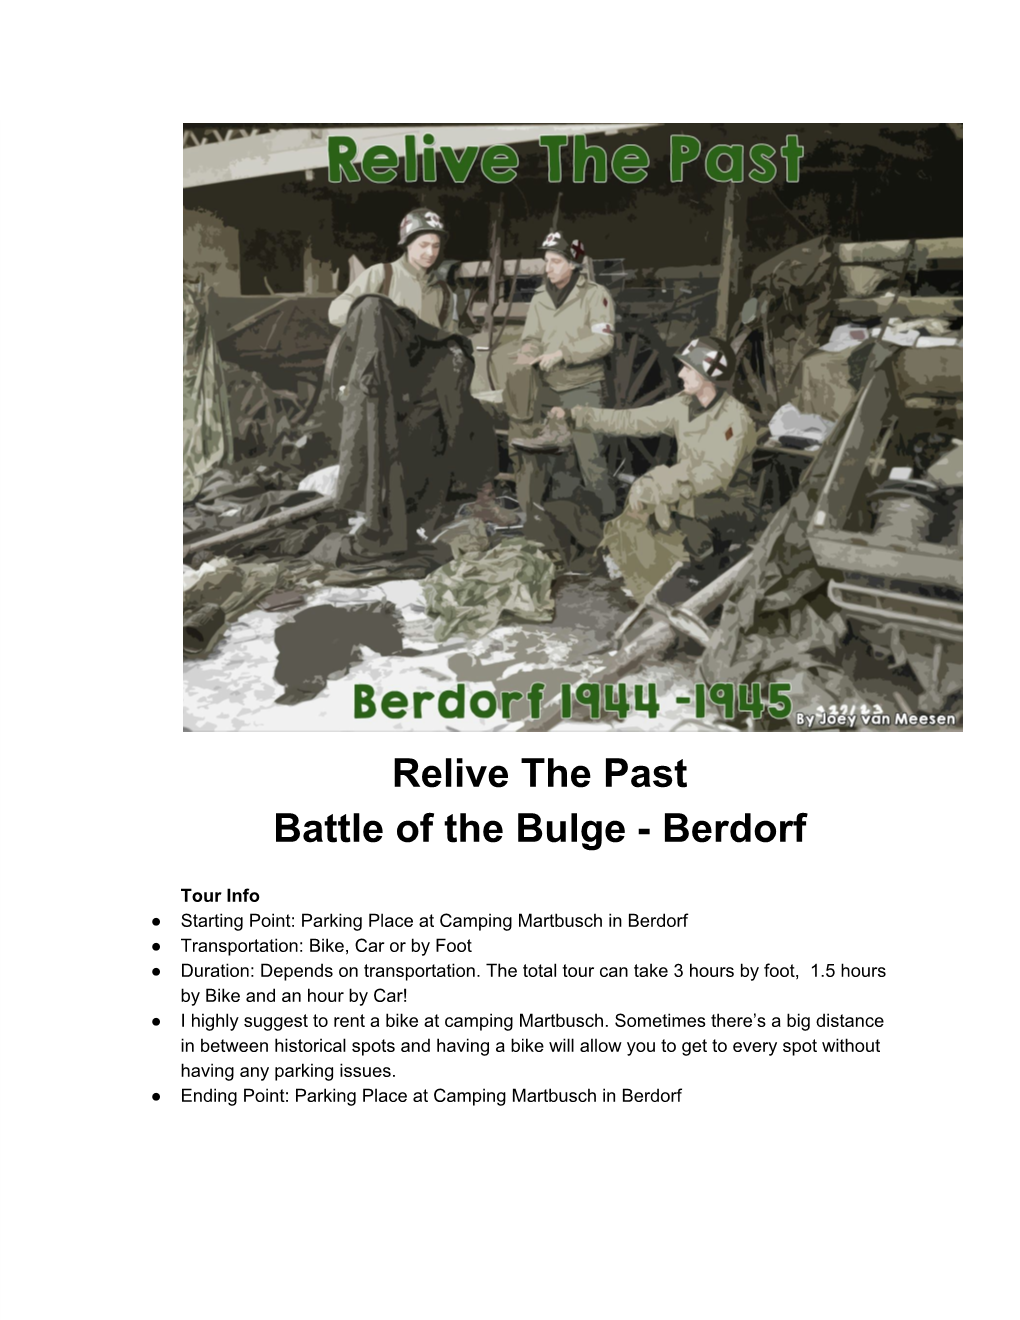 Relive the Past Battle of the Bulge Berdorf